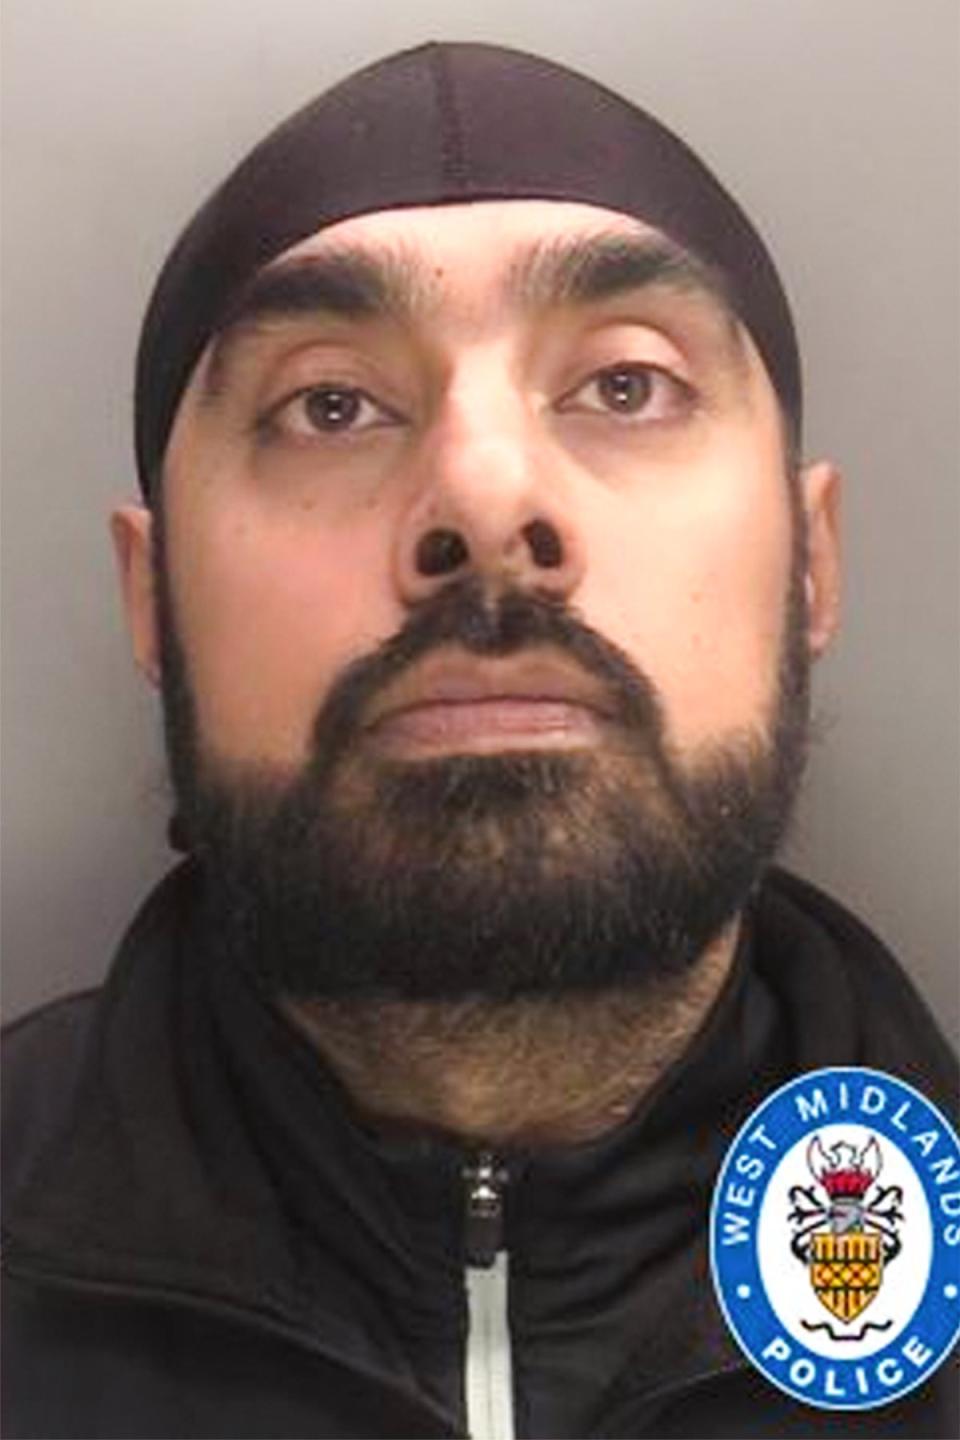 Sukvinder Mannan was sentenced to eight years in jail after being convicted of death by dangerous driving in 2015 - but released after four years (West Midlands Police)